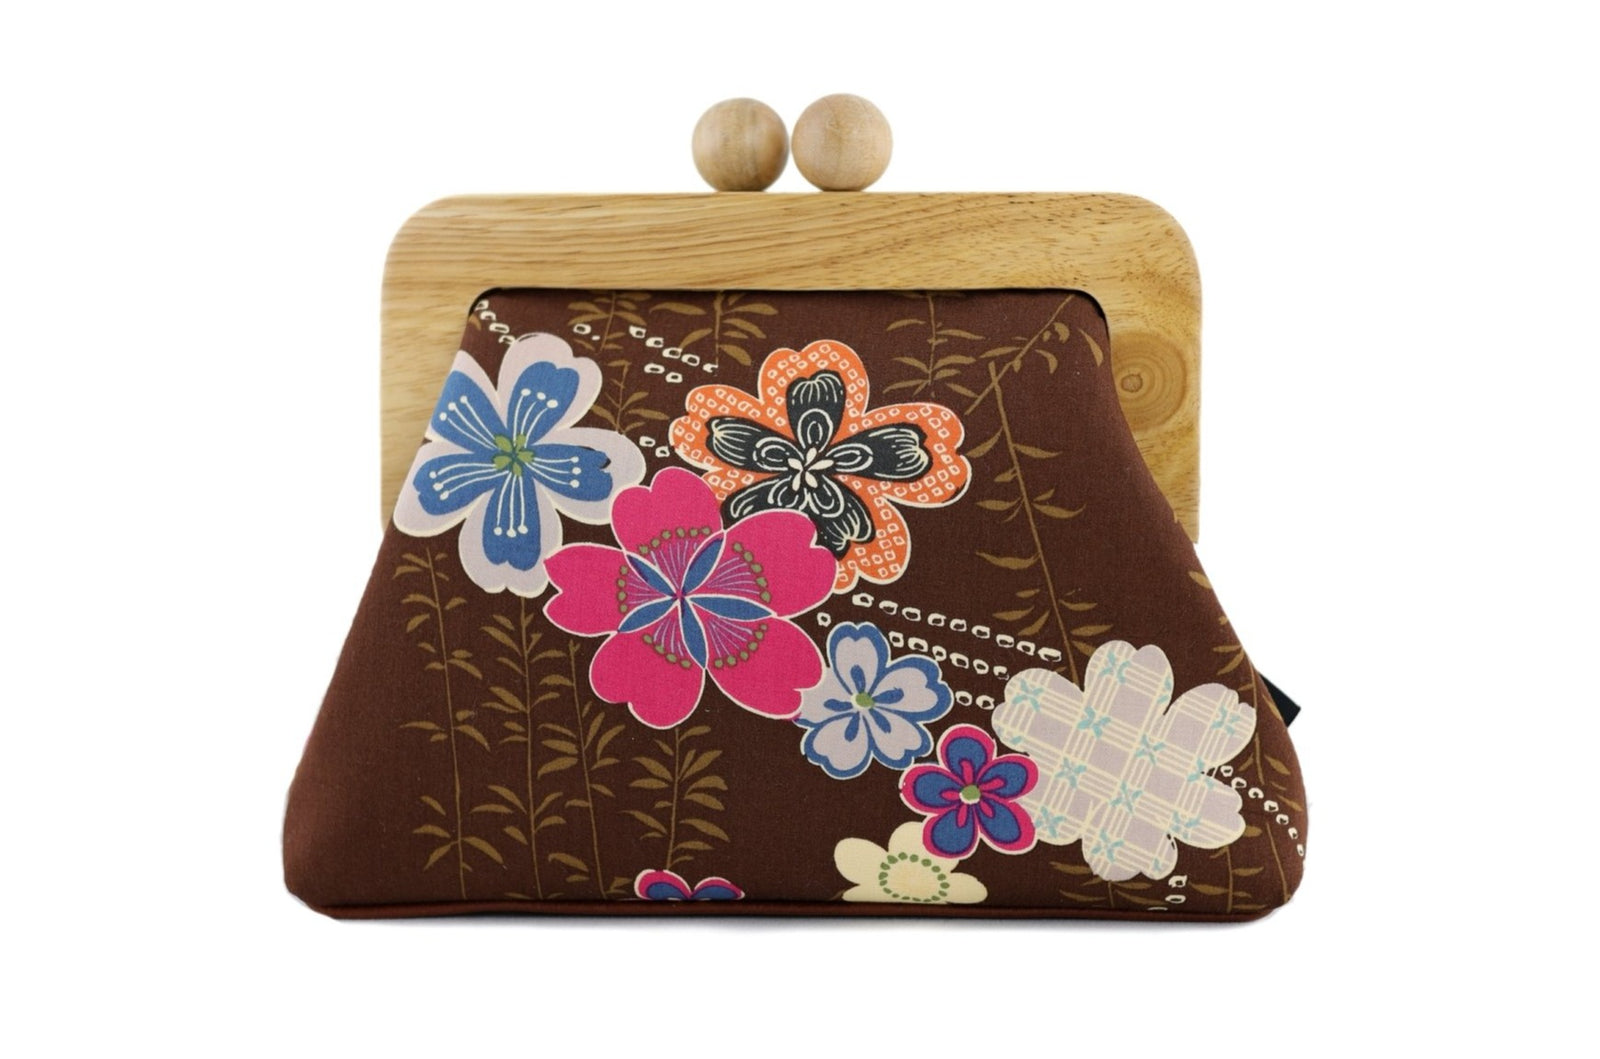 Chrysanthemum Double Clasp Coin Purse